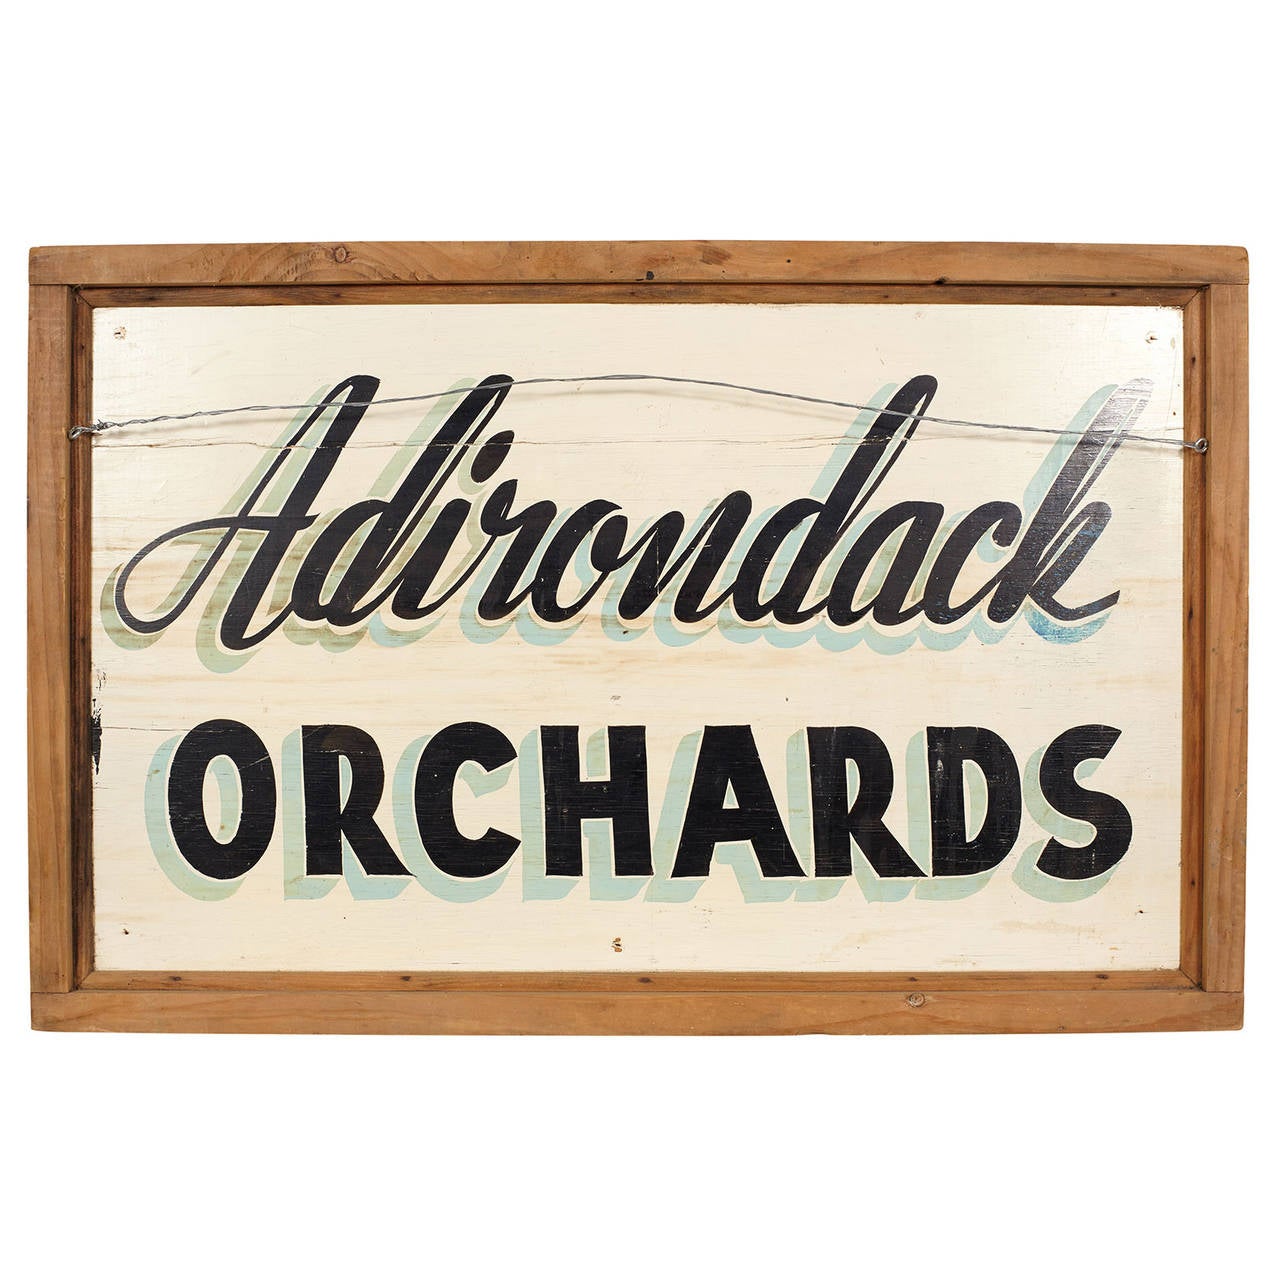 A vintage wood sign from the Adirondacks. Both sides painted. Ready to hang.